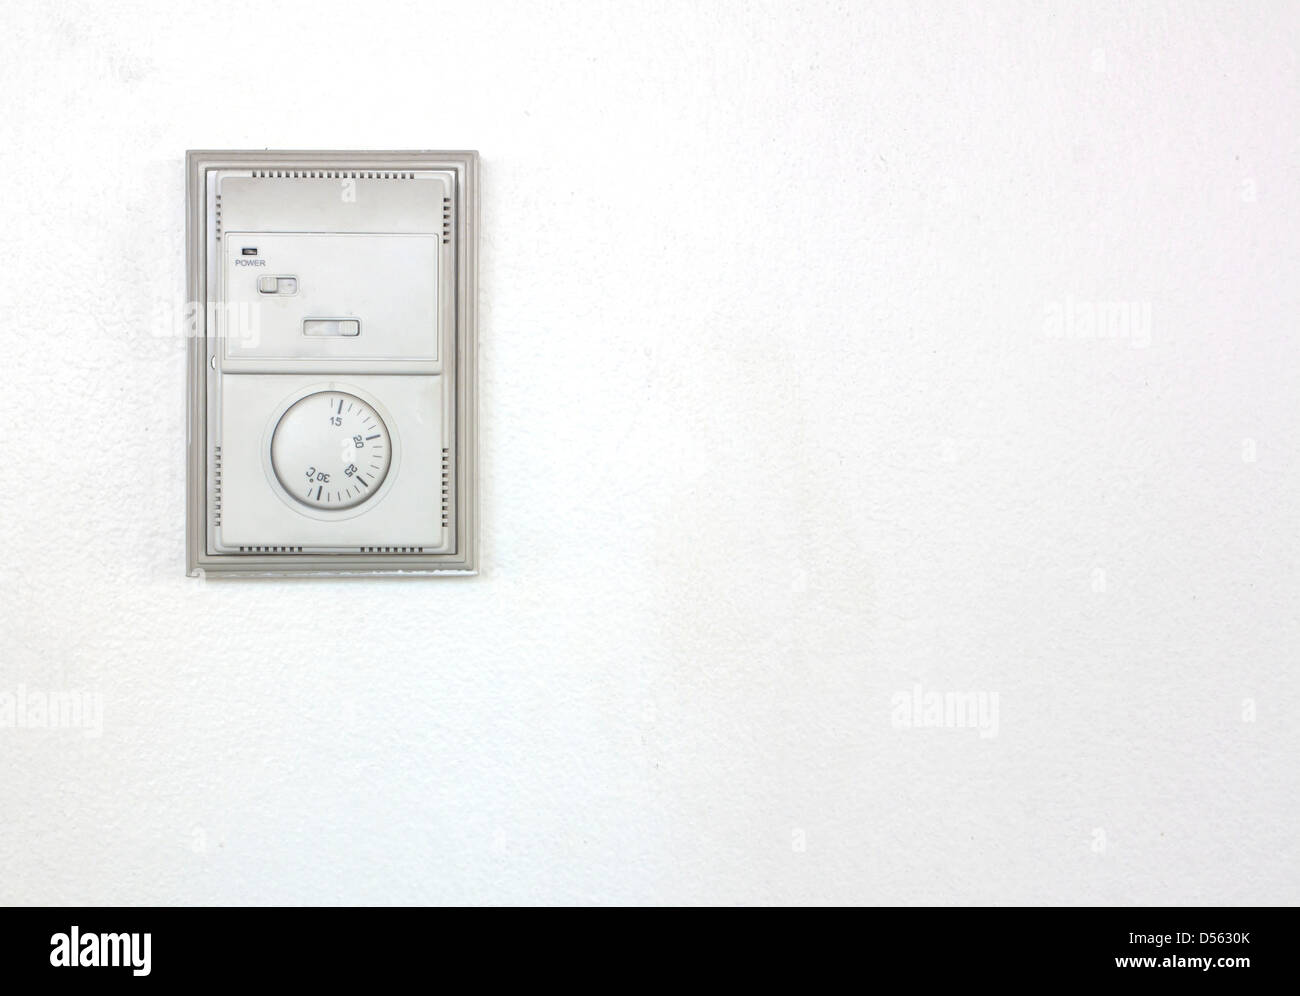 Room air conditioner thermostat. Stock Photo